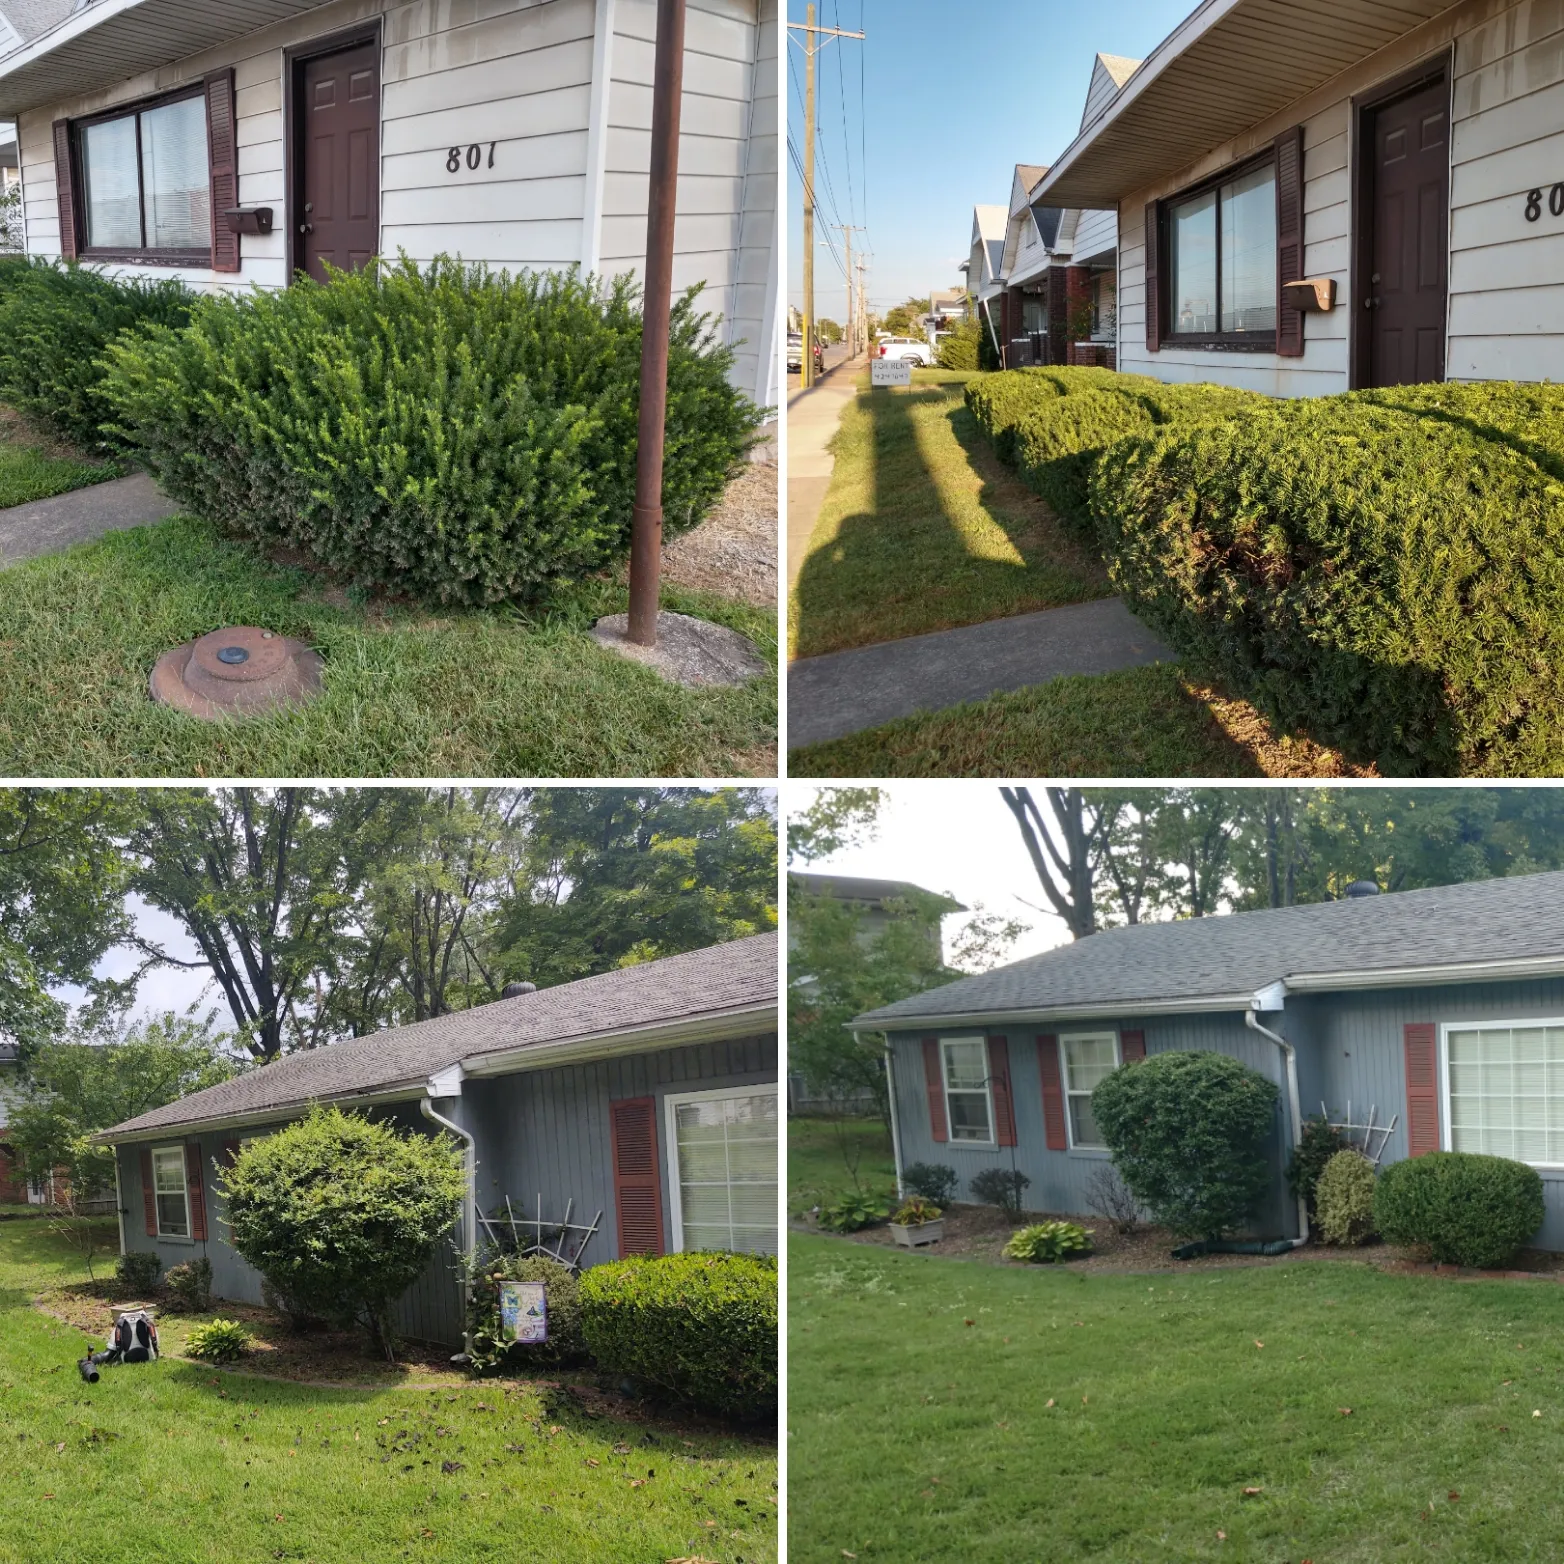 Pruning Bushes for The Grass Guys Complete Lawn Care LLC. in Evansville, IN